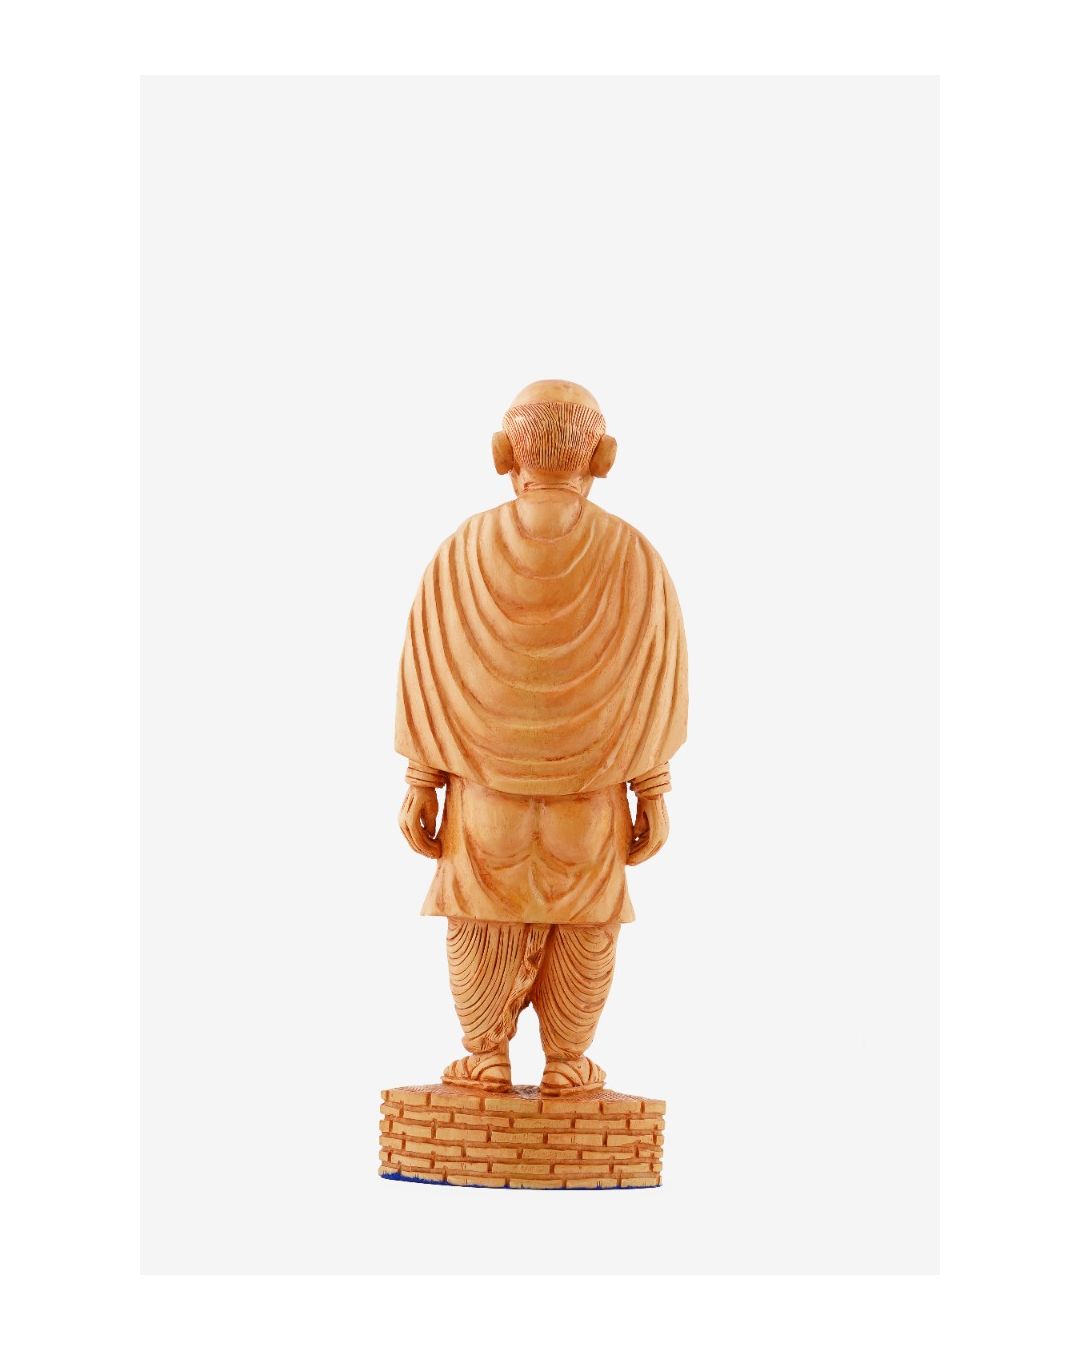 Sardar VallabhBhai Patel Costume For Kids/National Hero Fancy Dress/Politician  Costume For Kids/School Annual function/Theme Party/Competition/Stage Shows  Dress